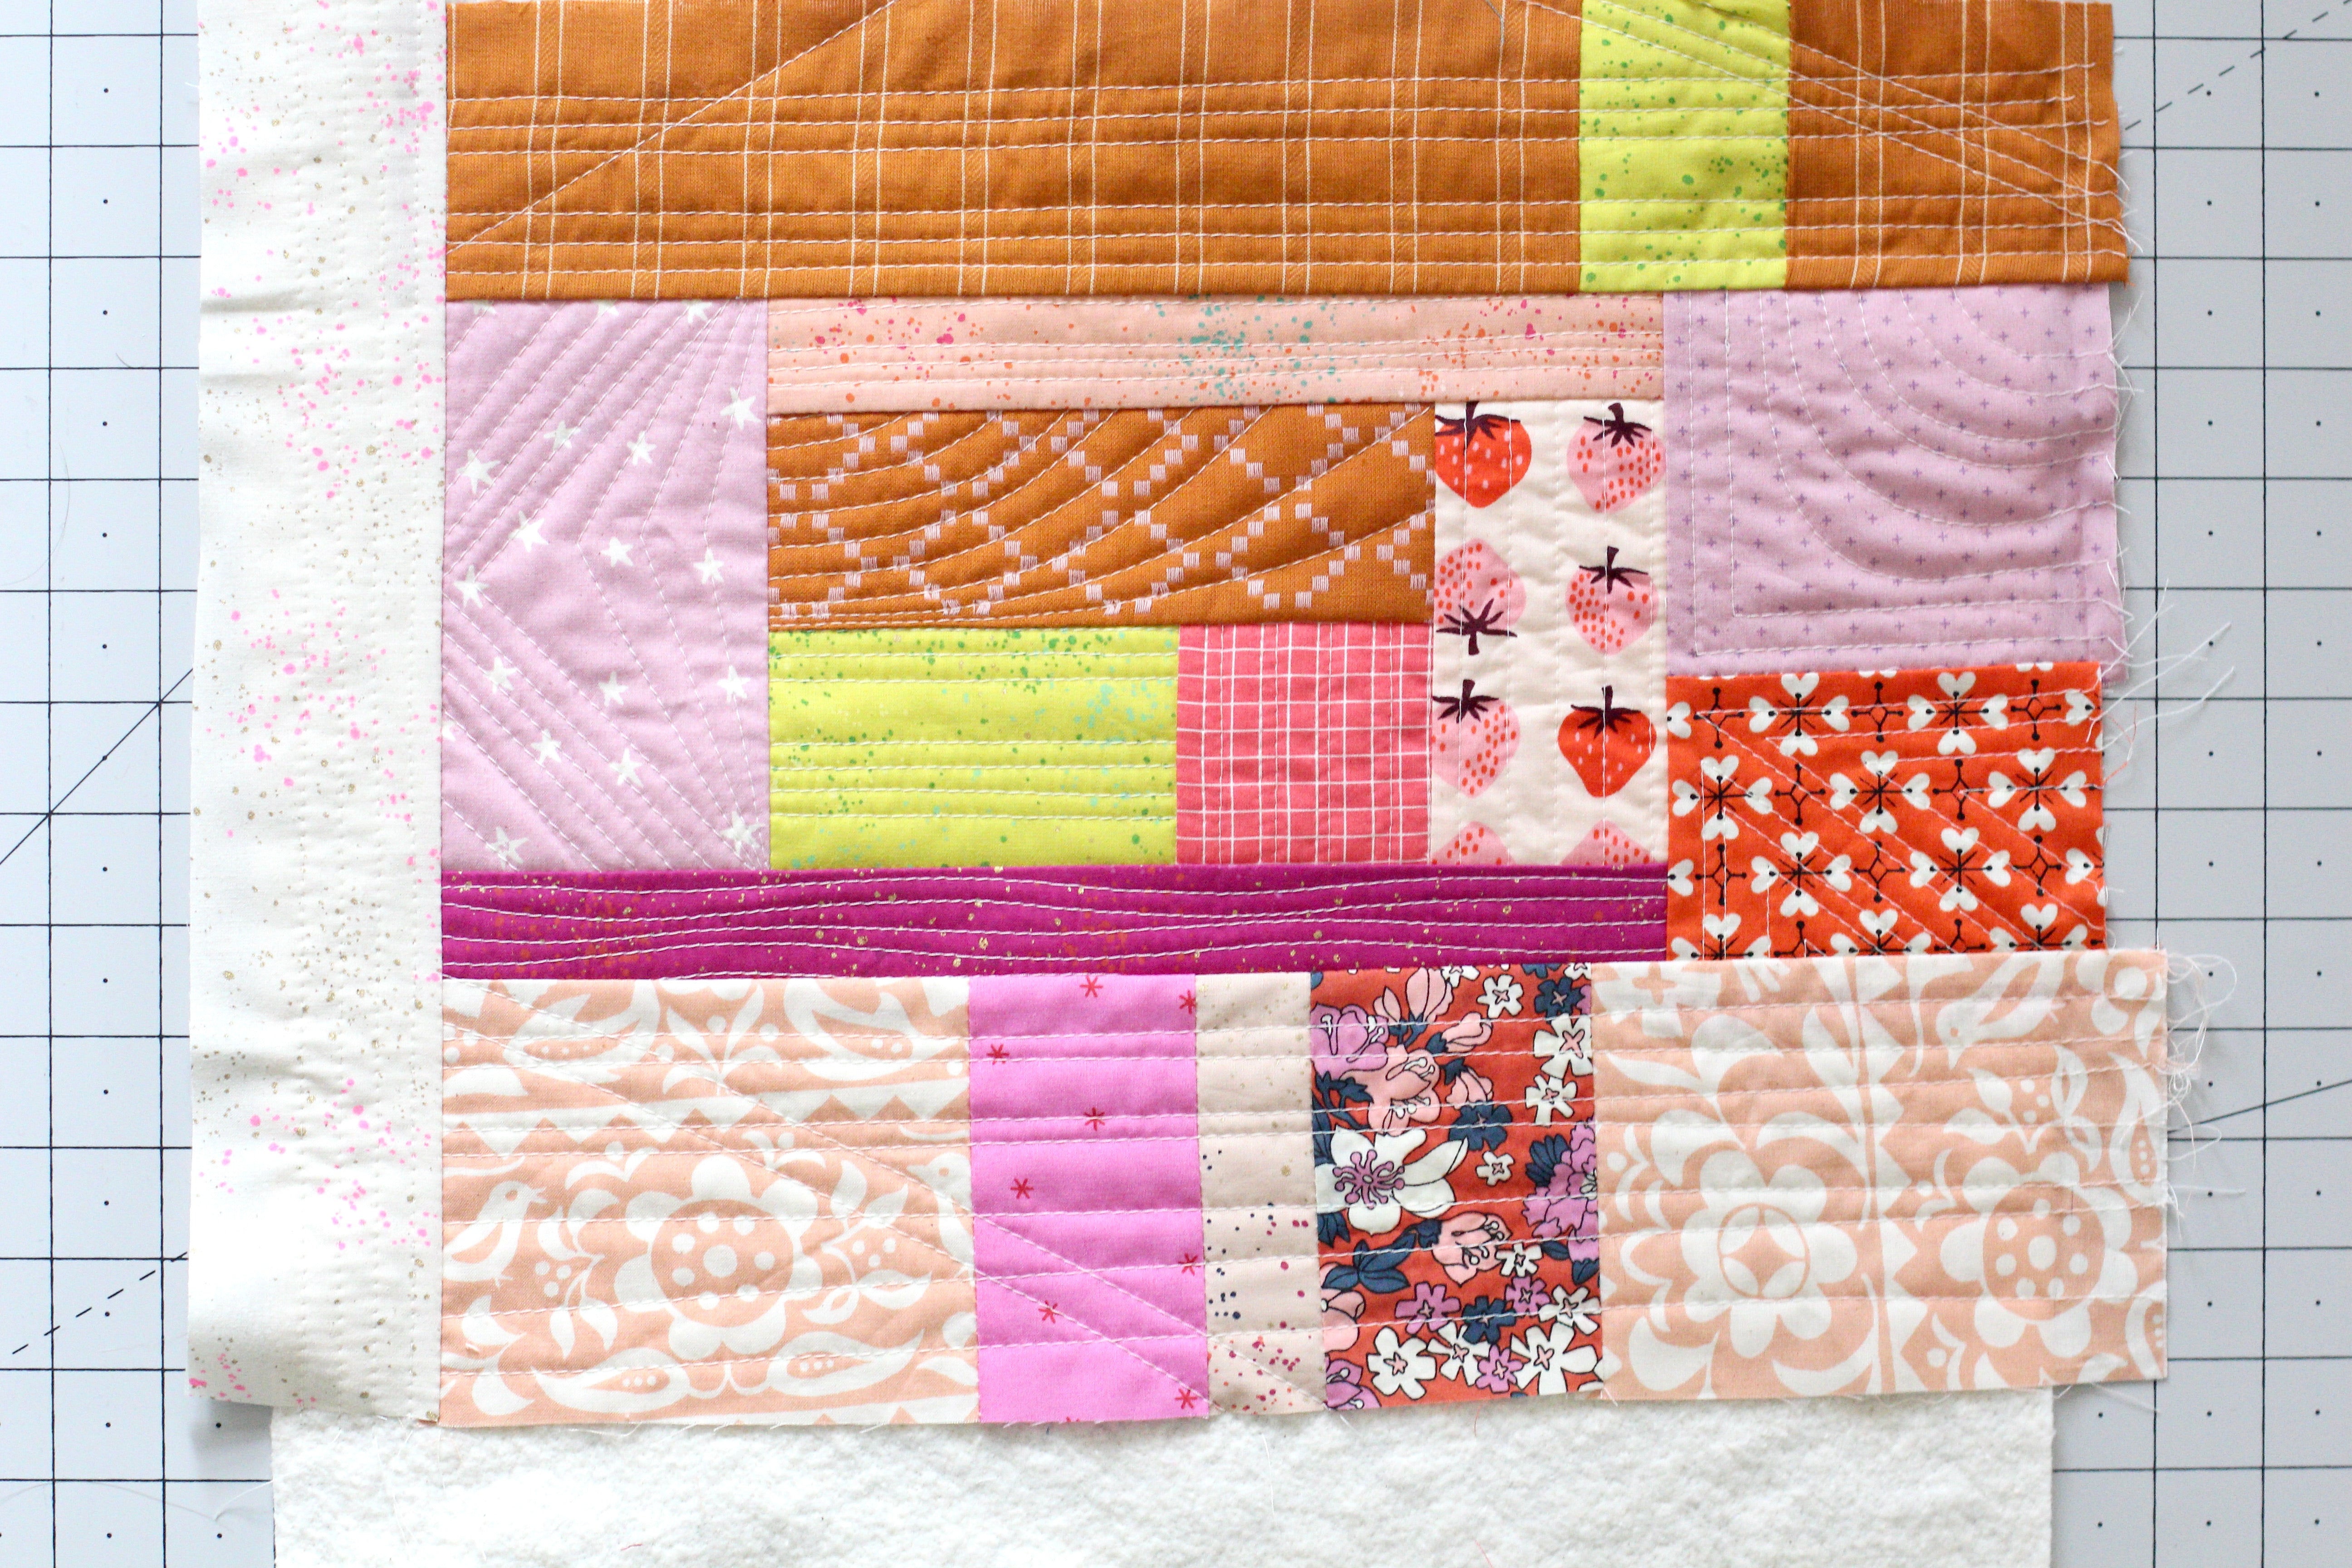 Quilt As You Go Project Bag Kit - Lighthearted - Makes 2 Bags